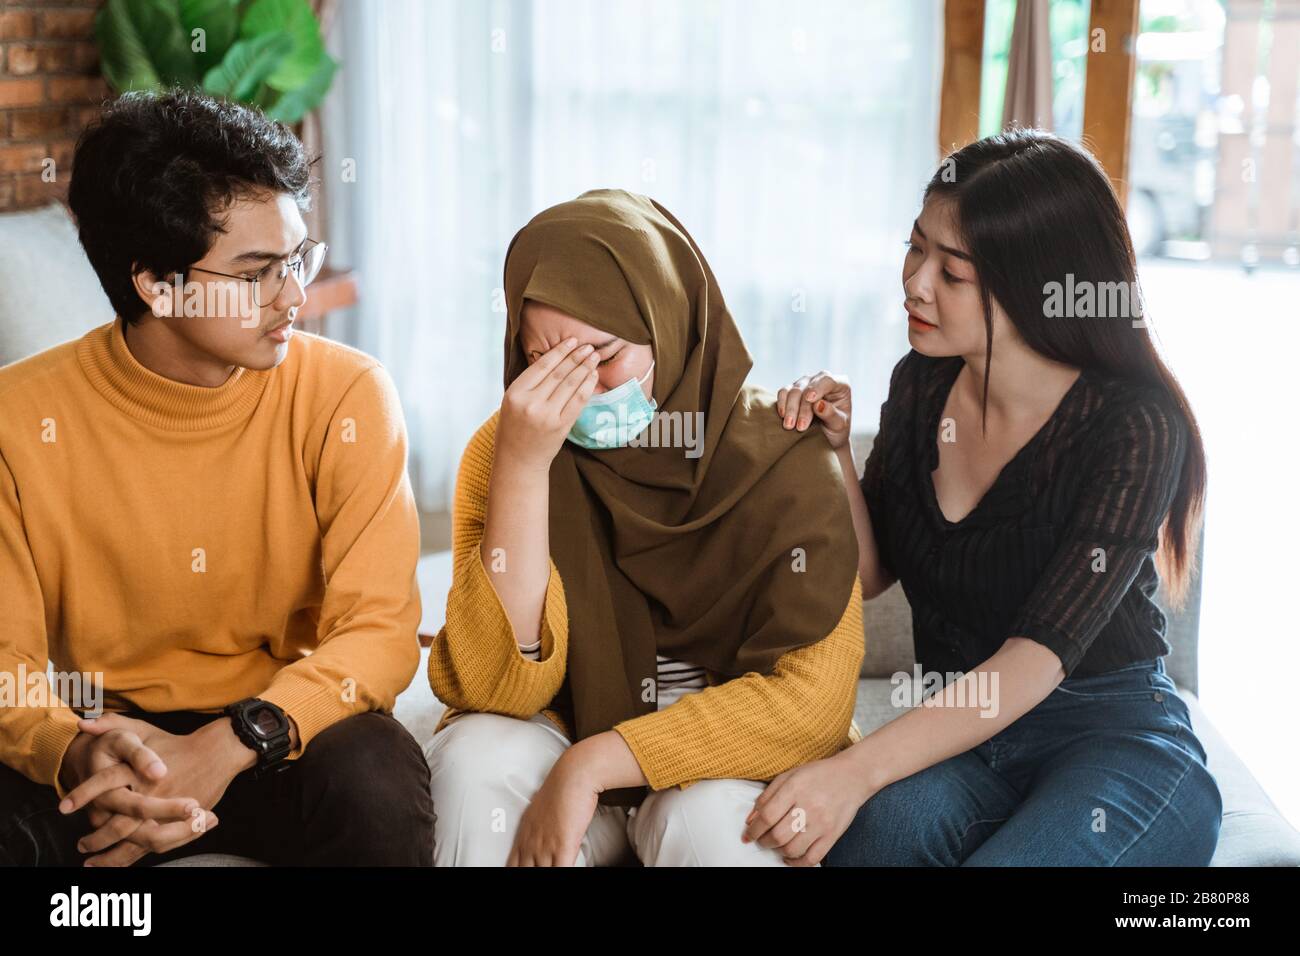 family support on people getting sick or in difficult situation Stock Photo